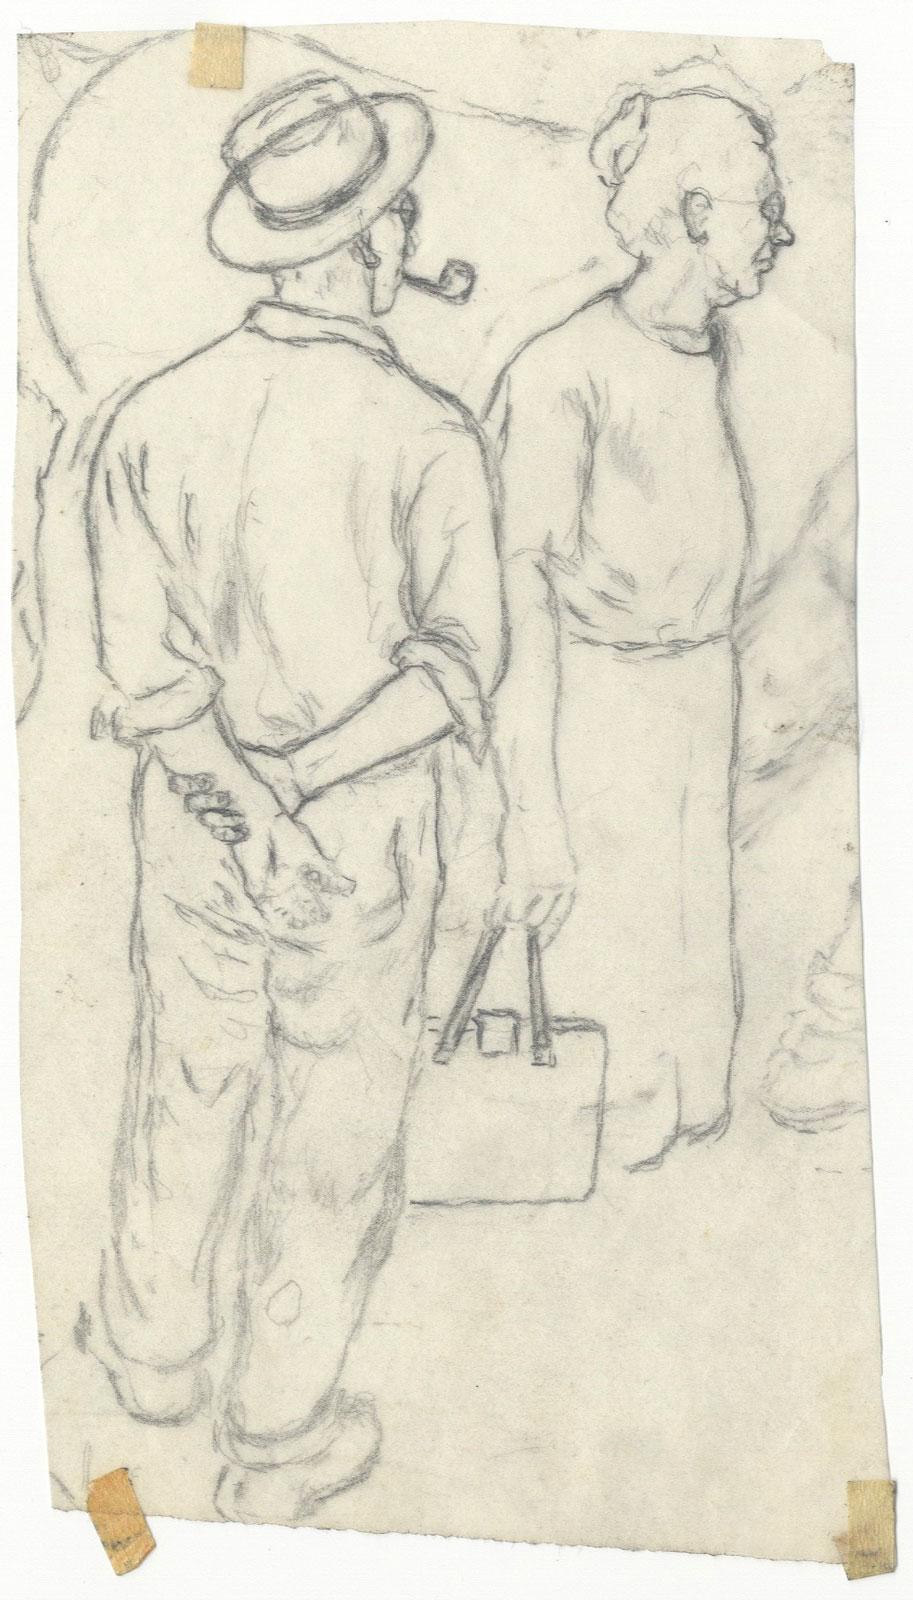 sketch of man with pipe and woman with purse - Art by Jackson Lee Nesbitt